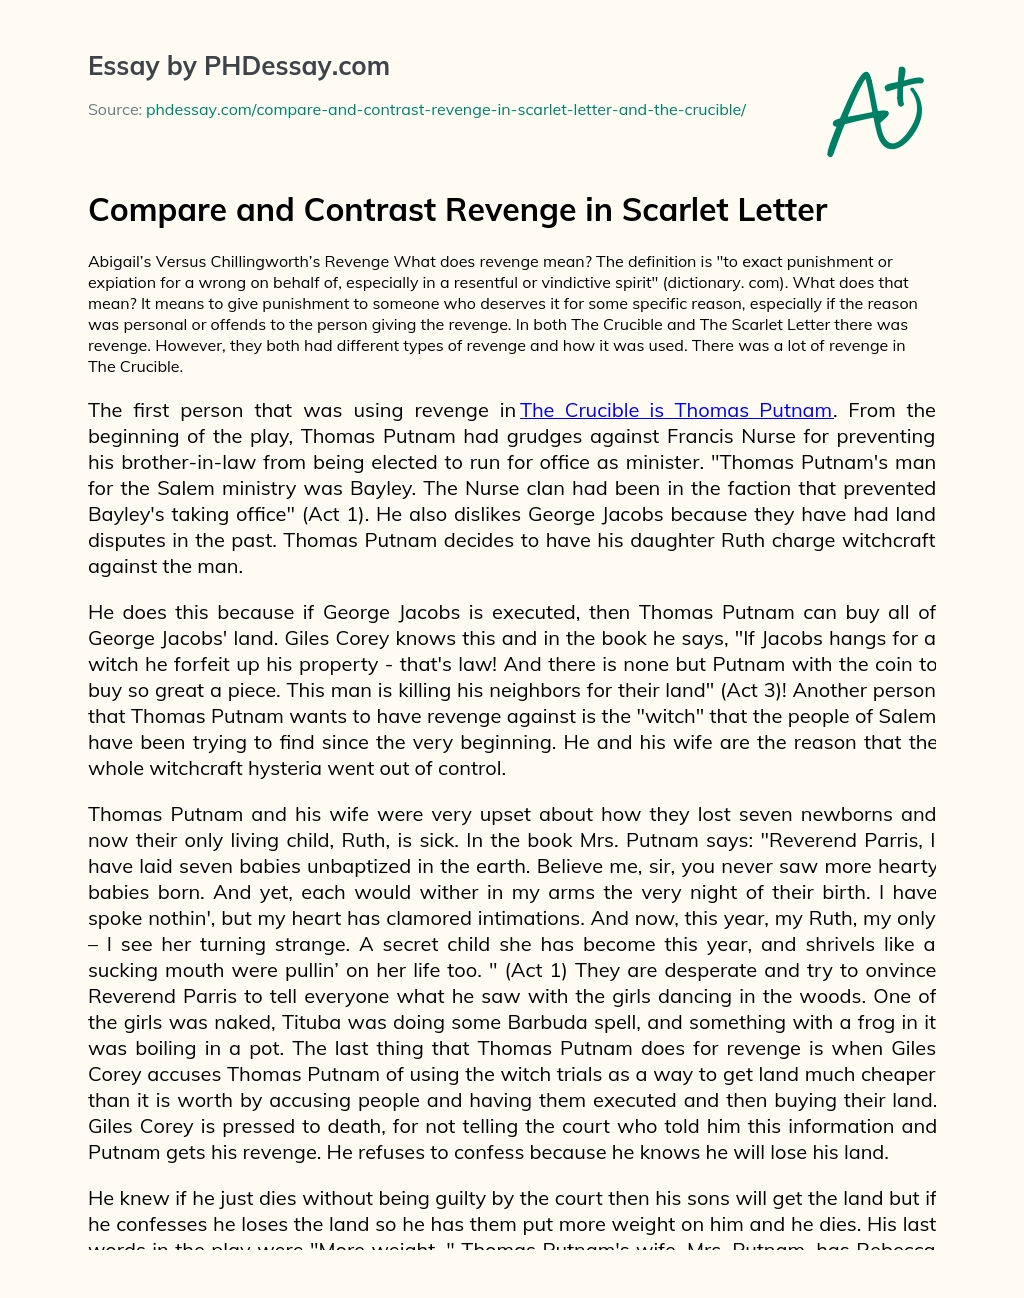 Compare and Contrast Revenge in Scarlet Letter essay